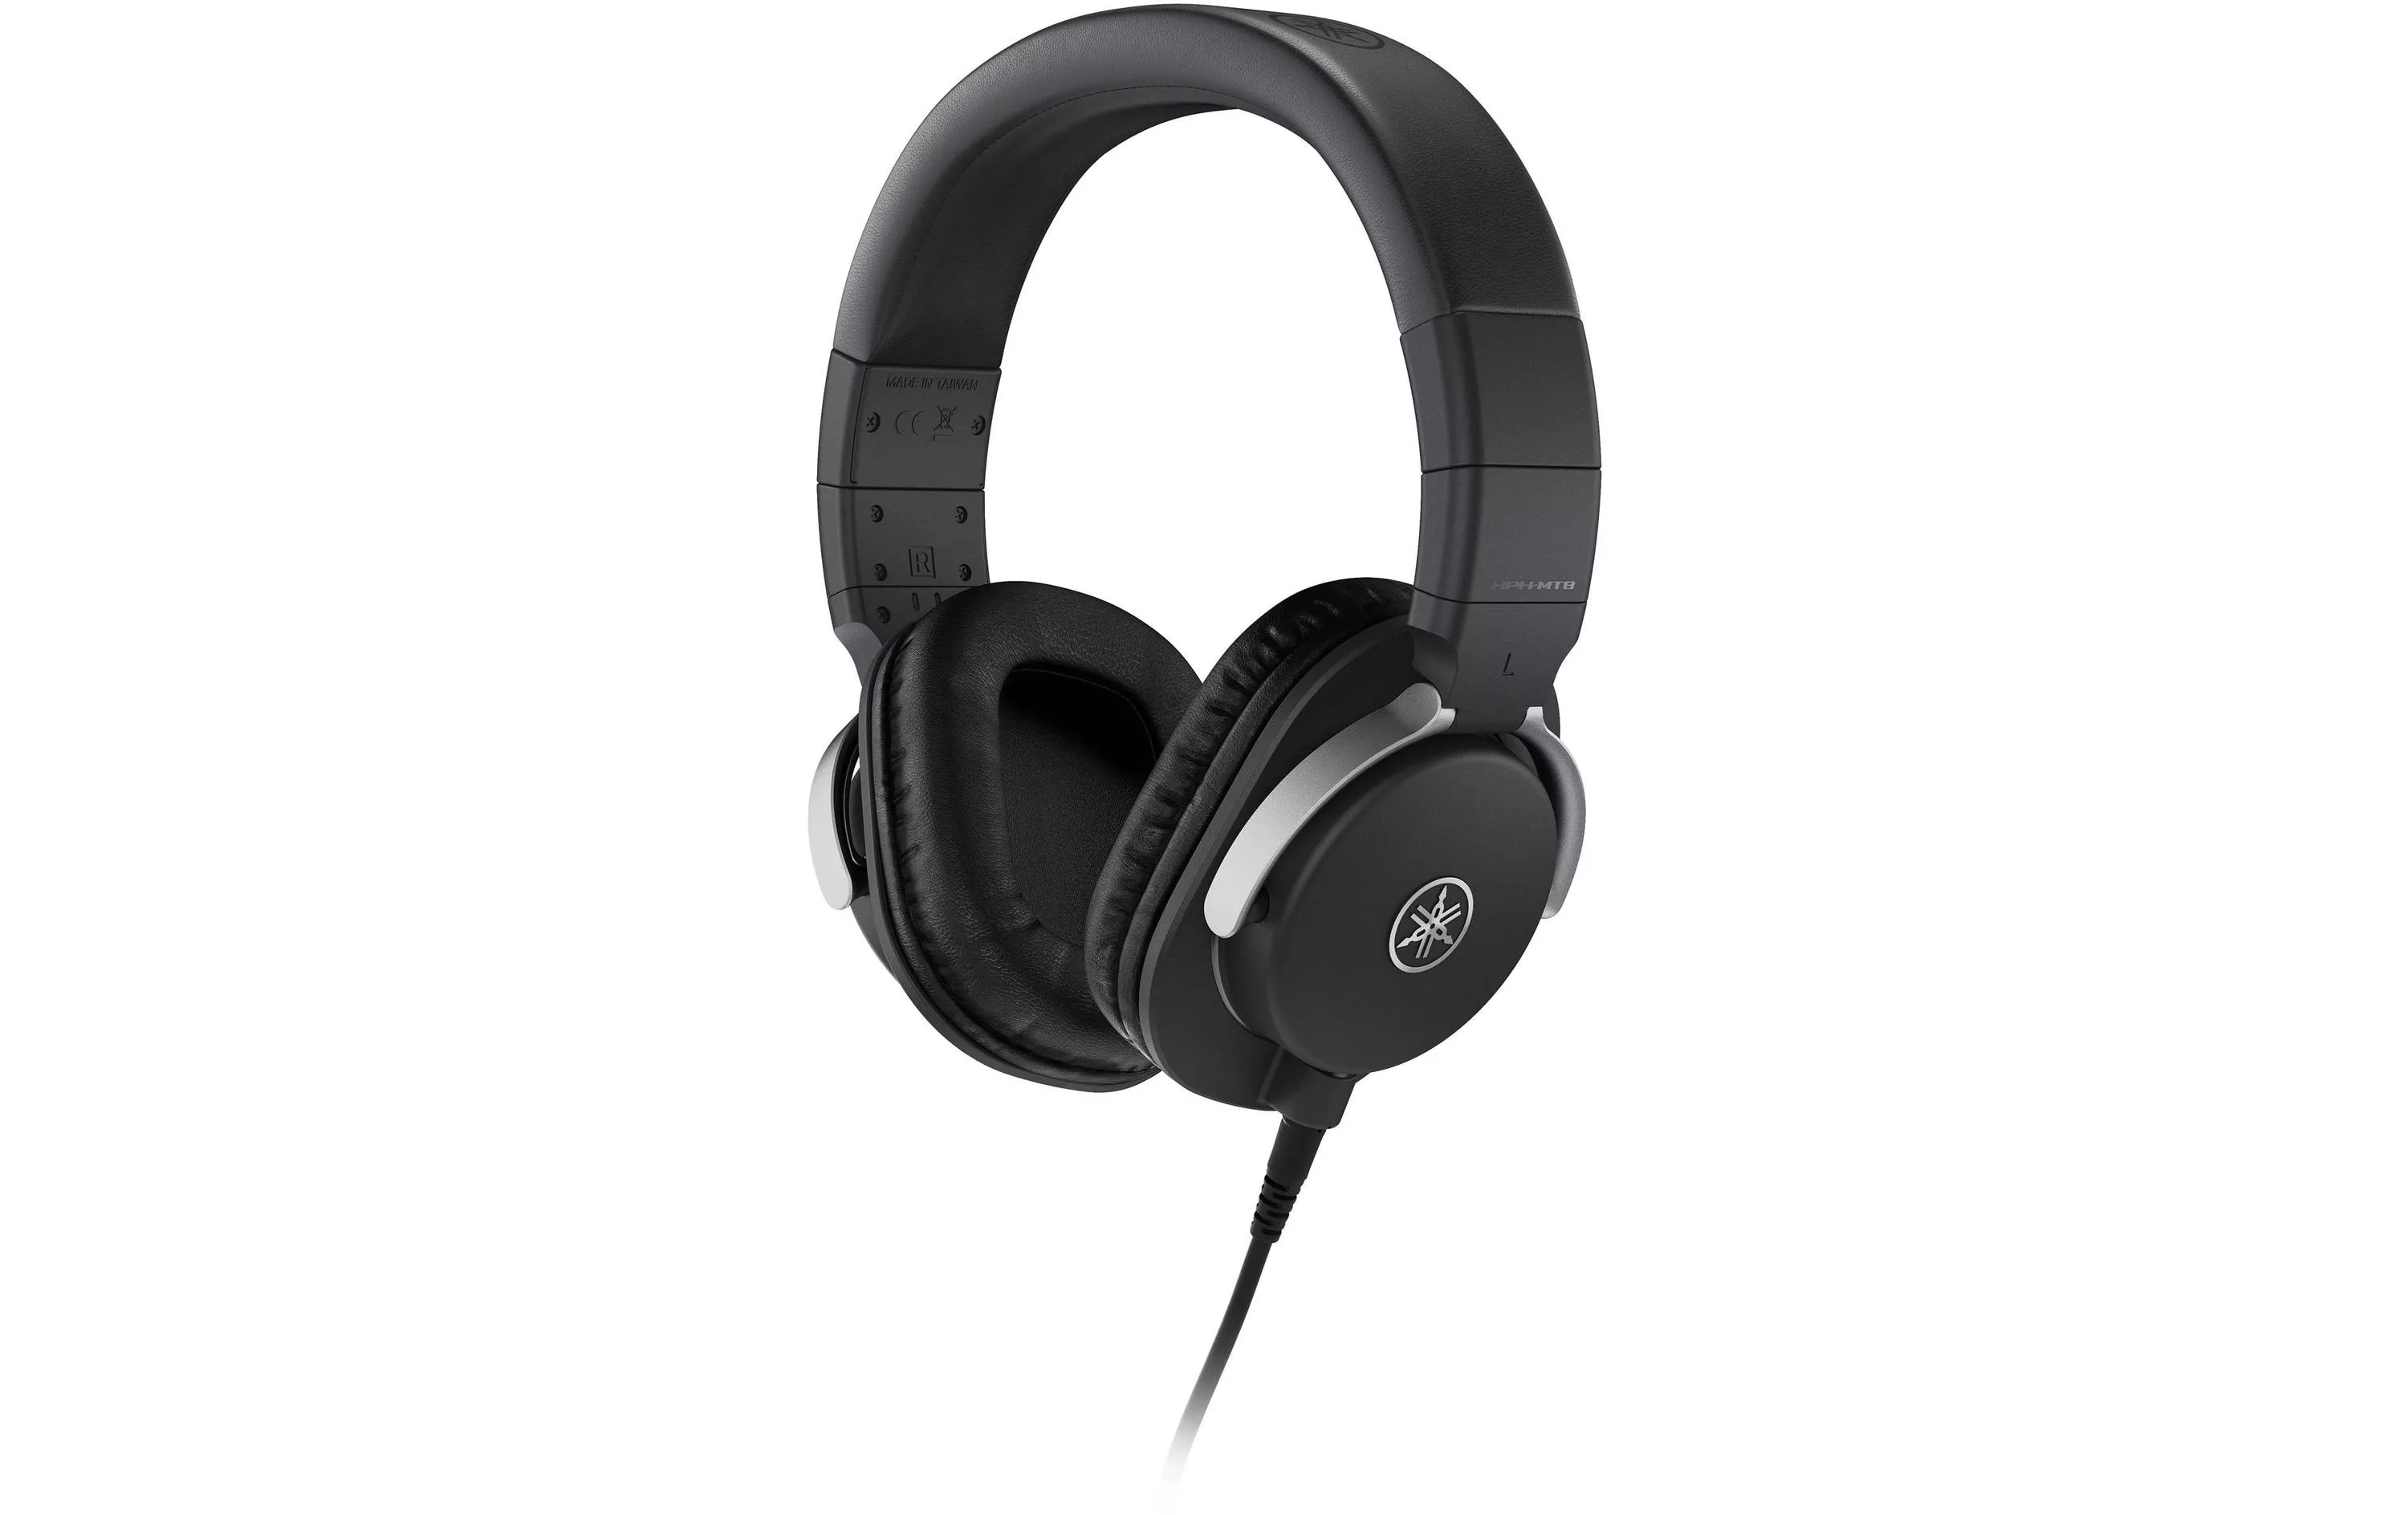 HPH-MT8 Cuffie over-ear nere